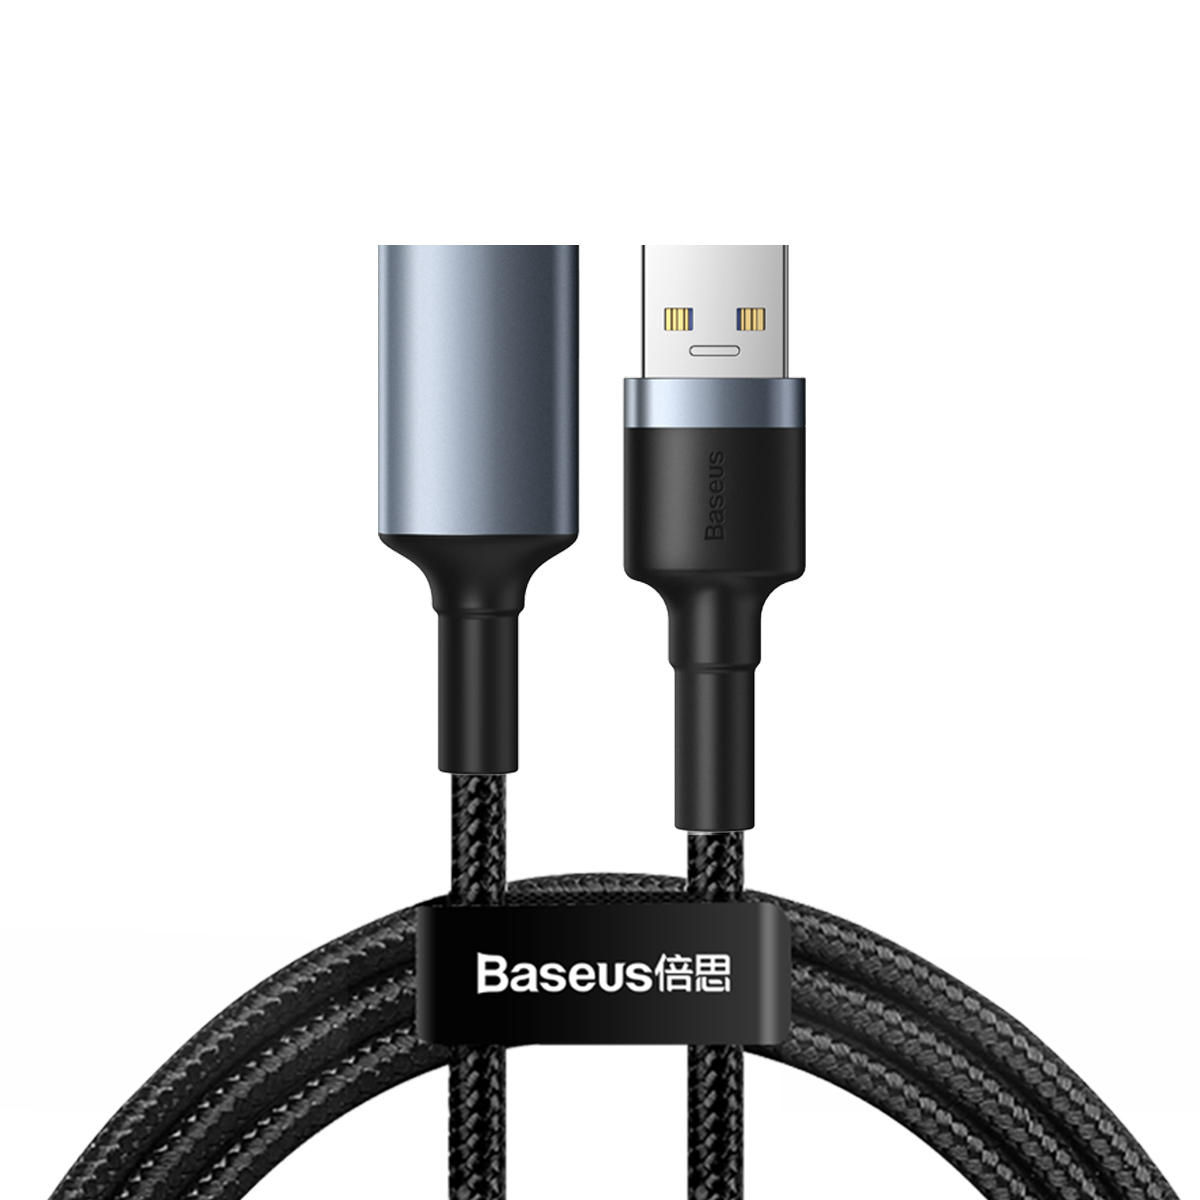 

Baseus Cafule USB3.0 Male to USB3.0 Female 2A 1m Data Cable for Mobile Phone